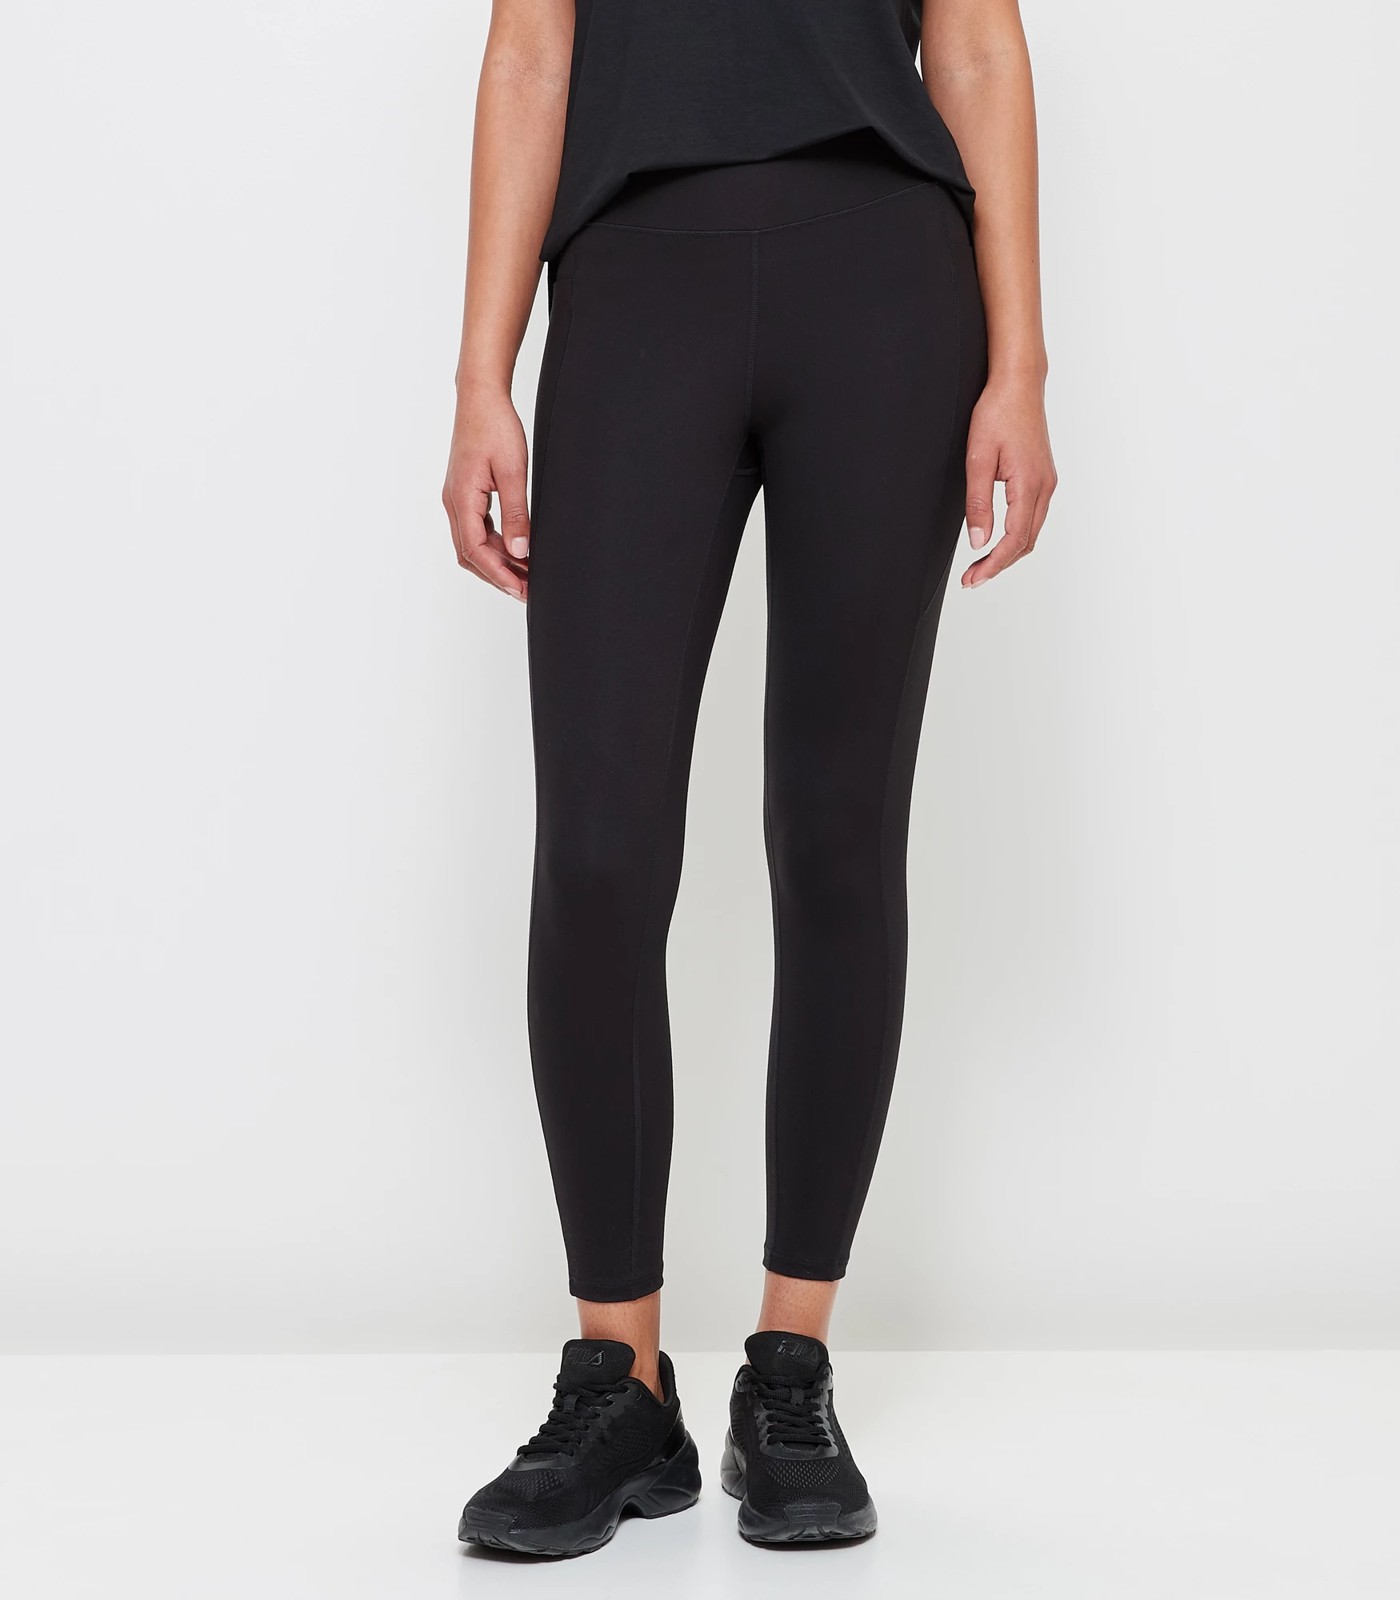 Active 7/8 Length Workout Tights